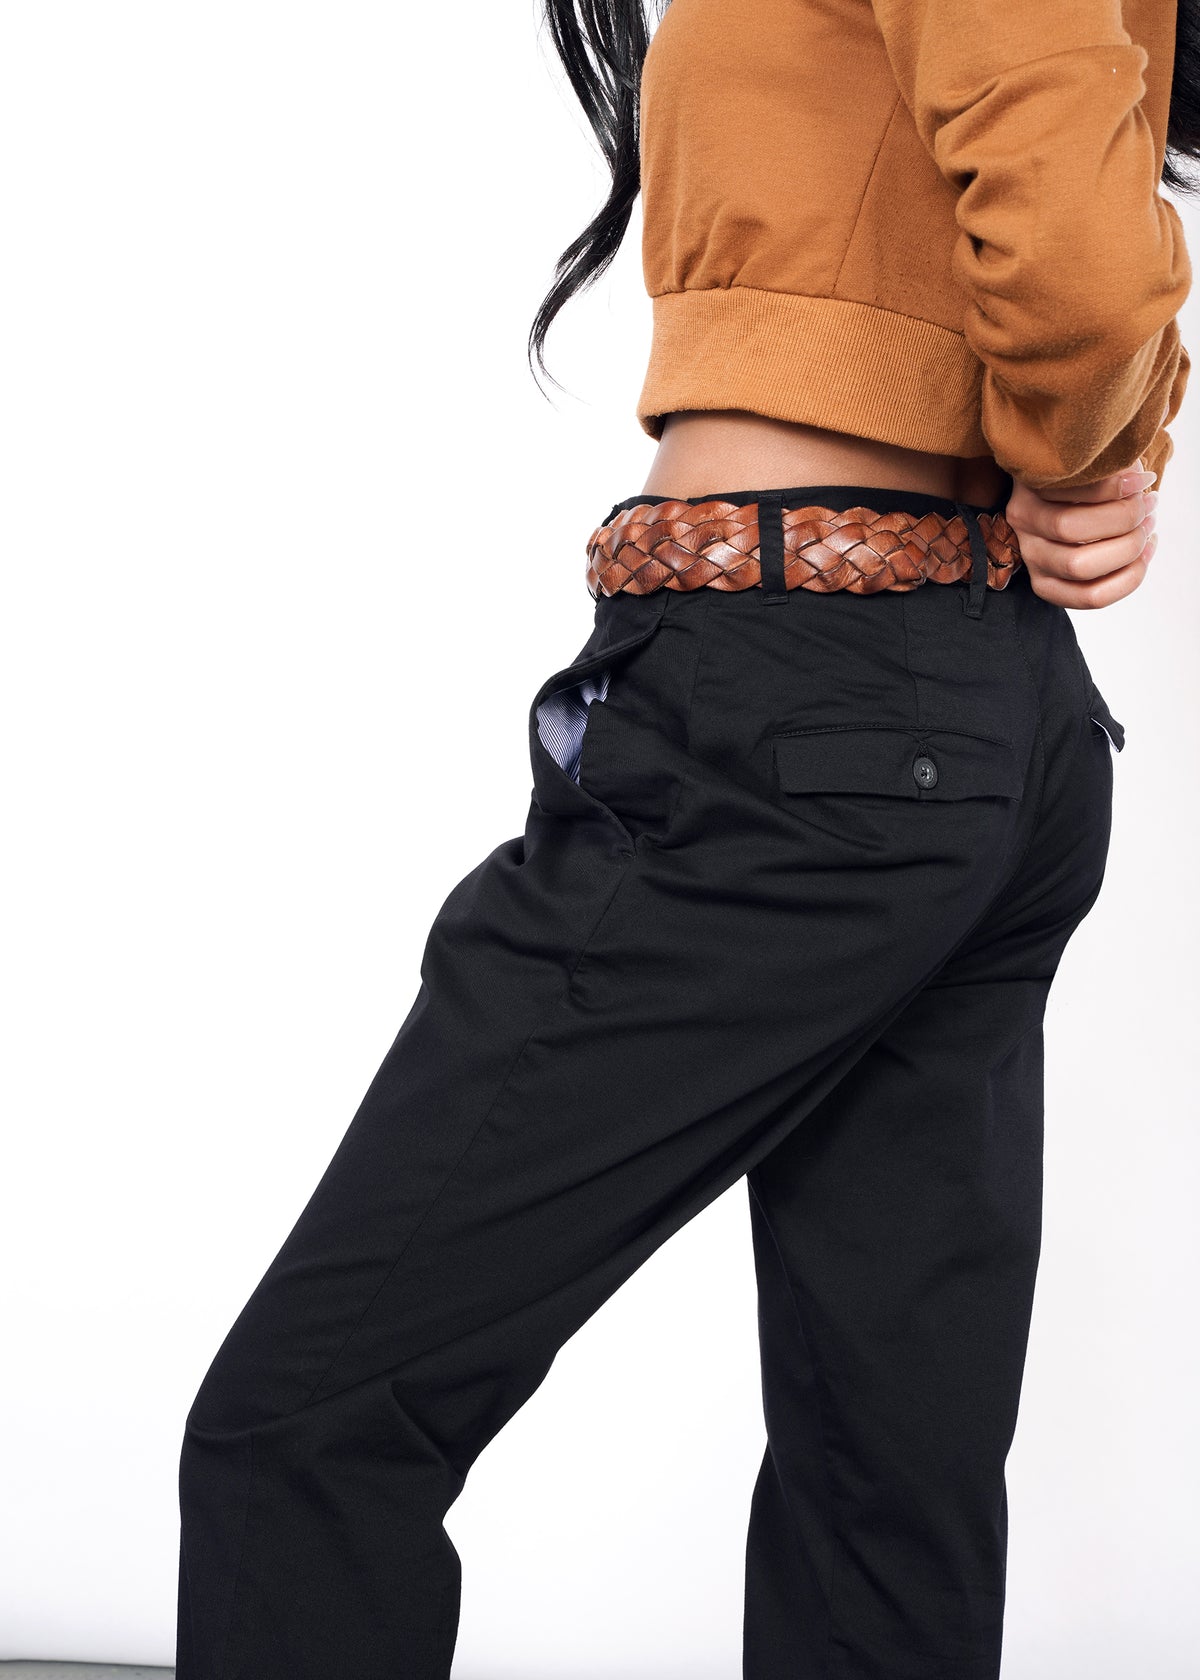 Back view of model wearing black essential trouser in size 2, showing interior lining in pocket and button flap back pockets